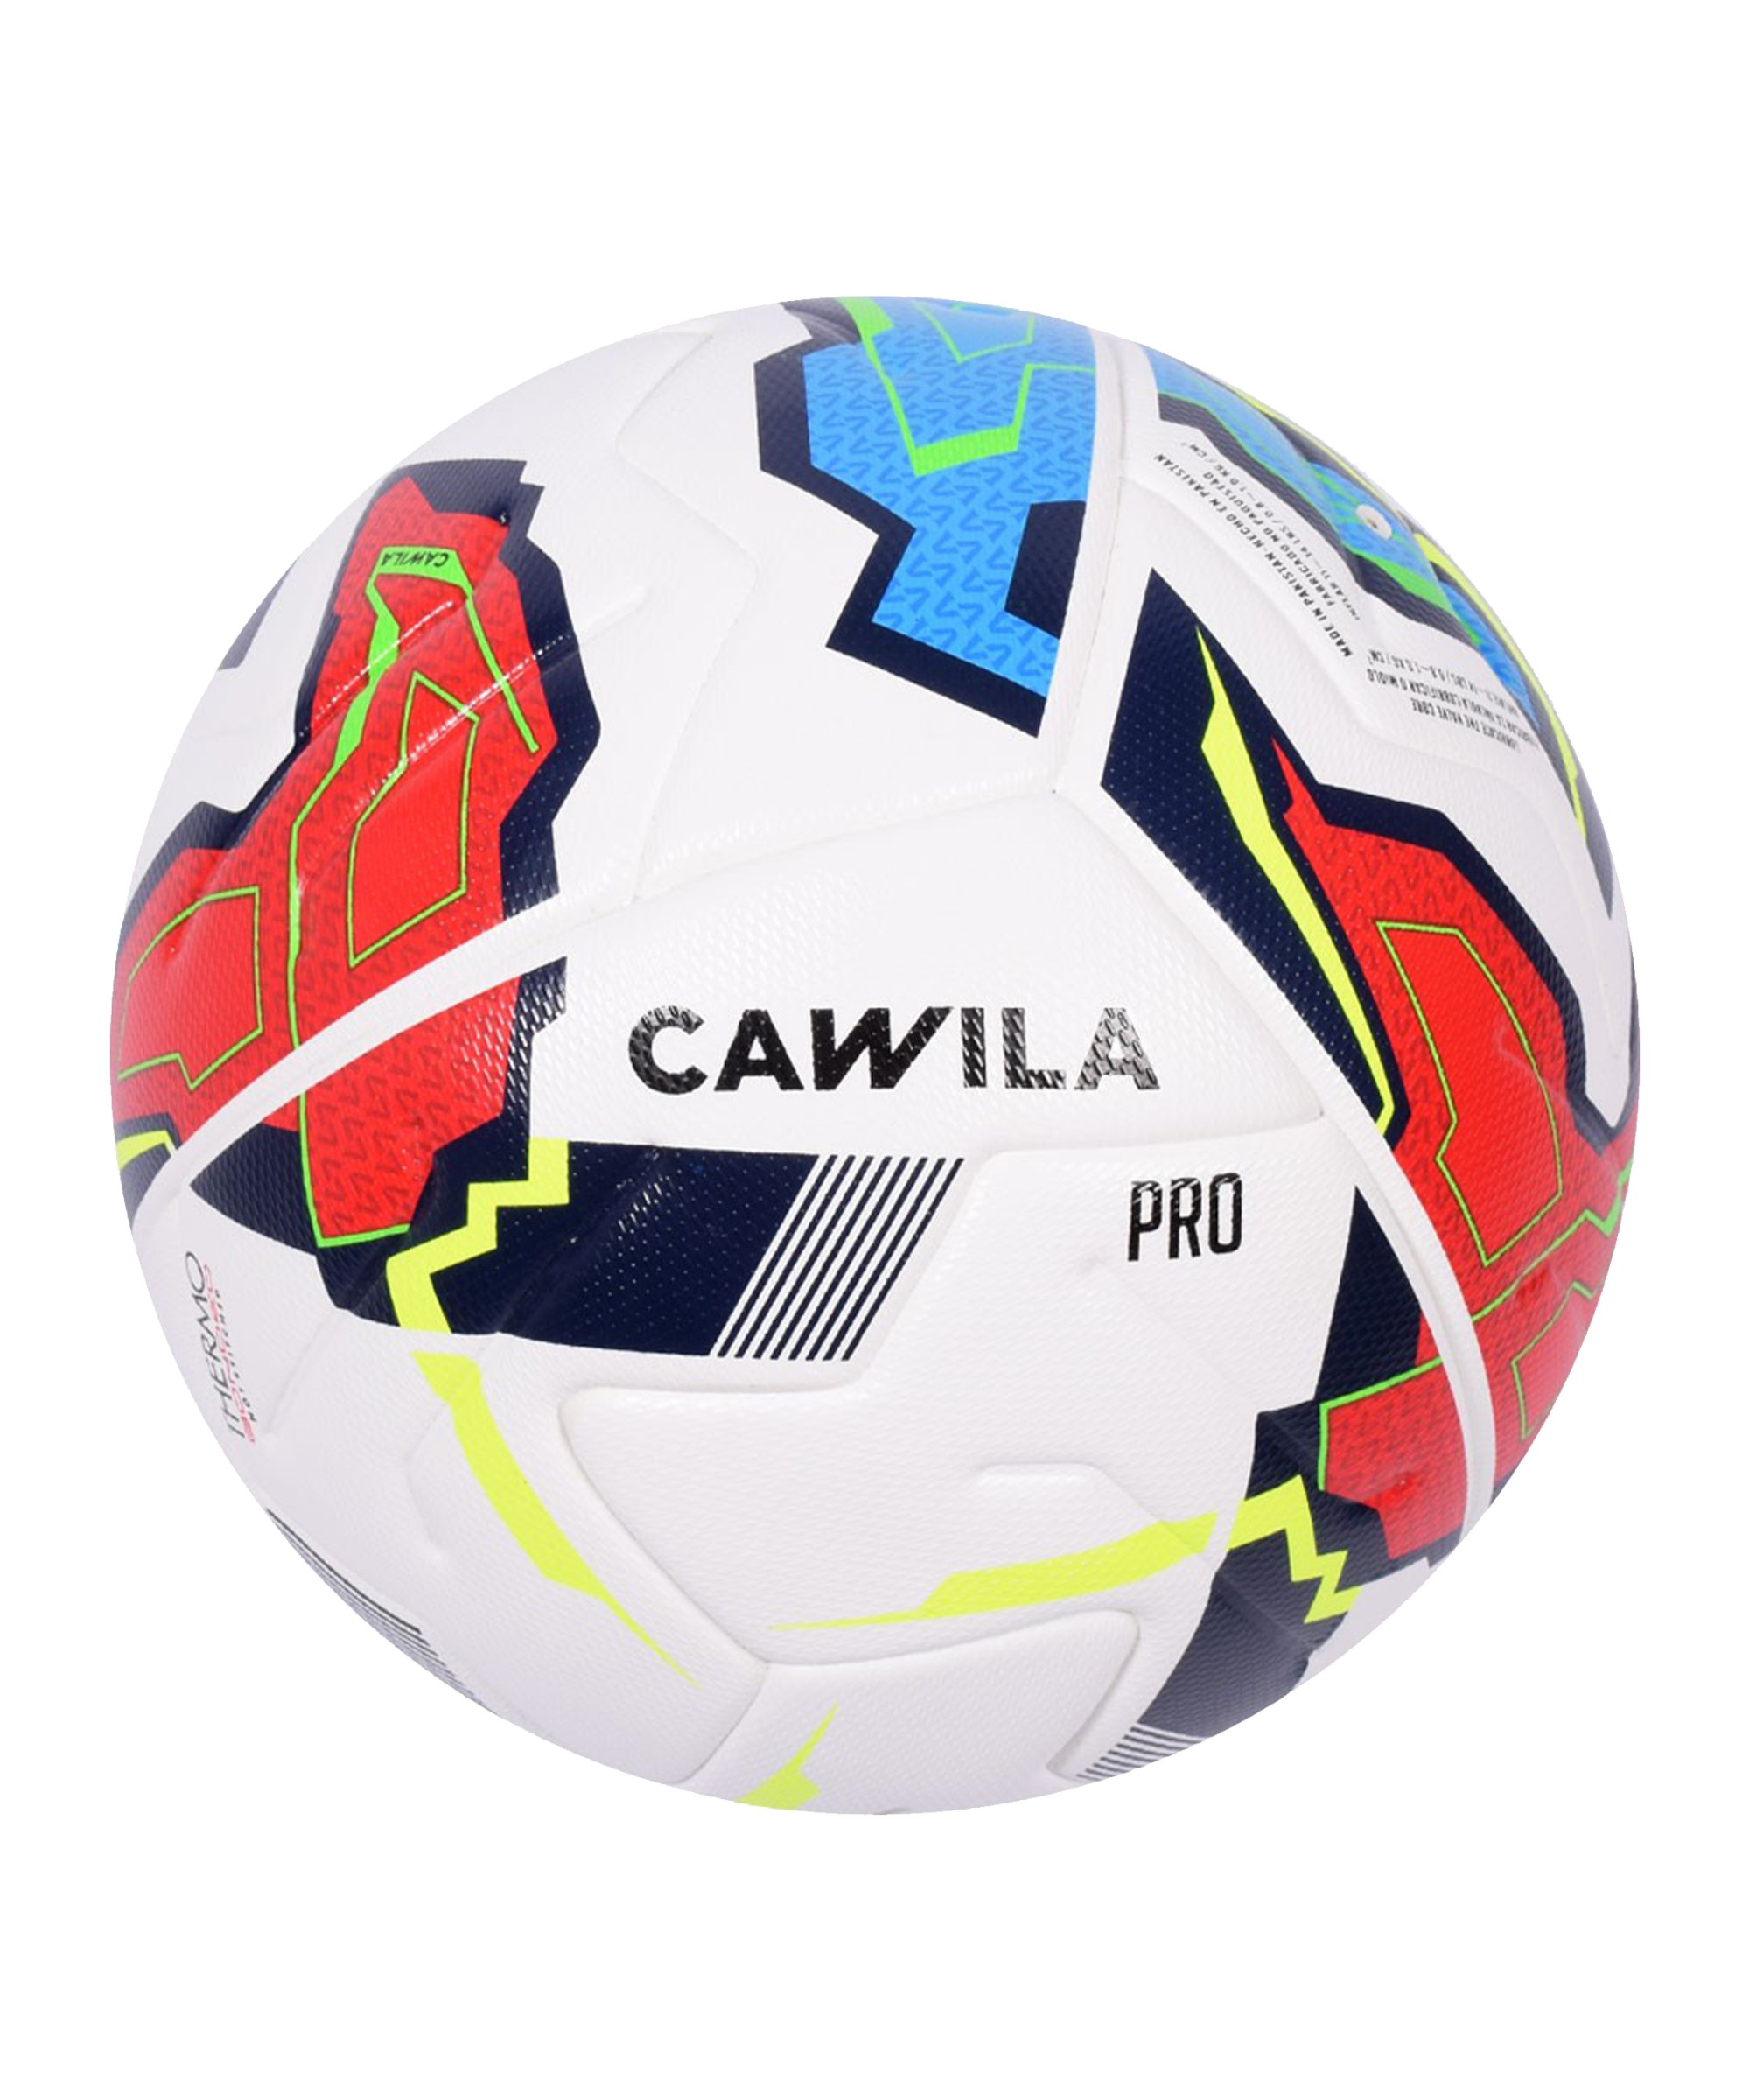 Cawila MISSION INVERTER Fairtrade Trainingsball Gr. 5 - weiss